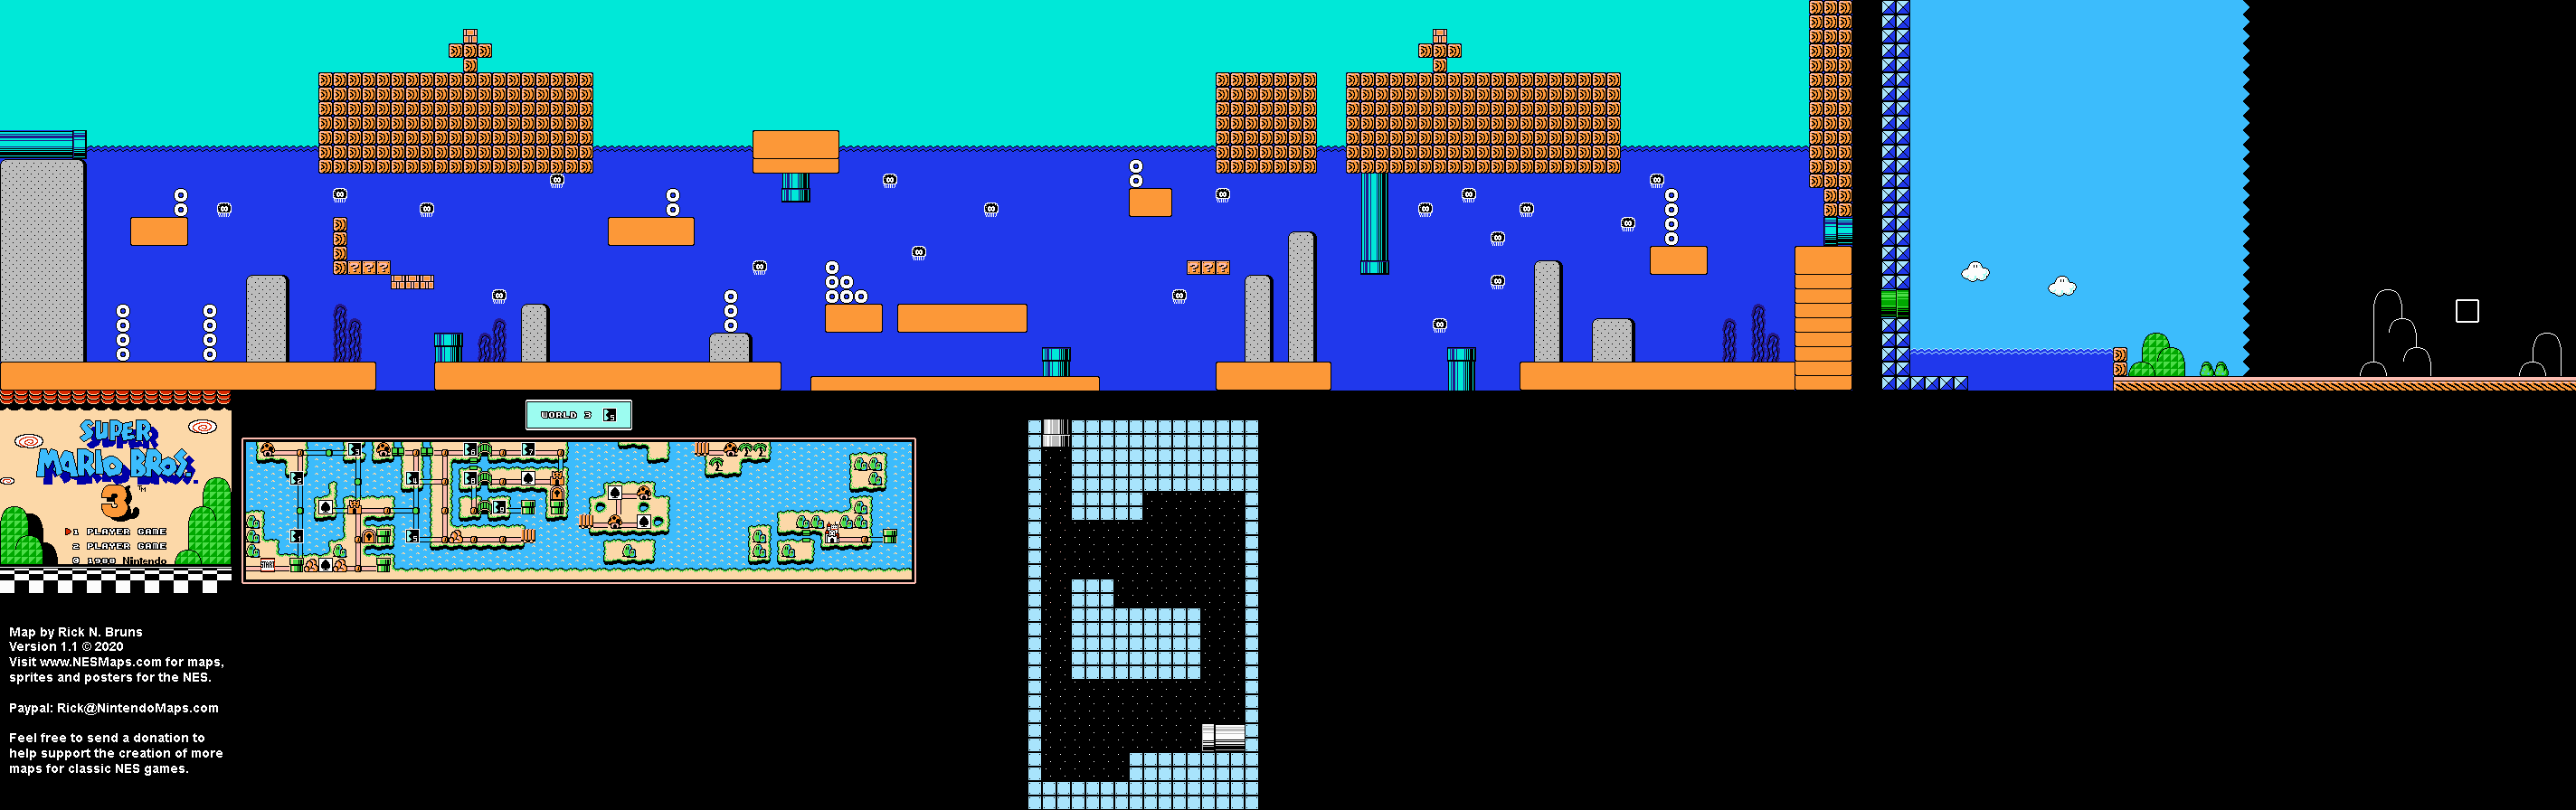 the wall in super mario bros 3 world 1 level 4